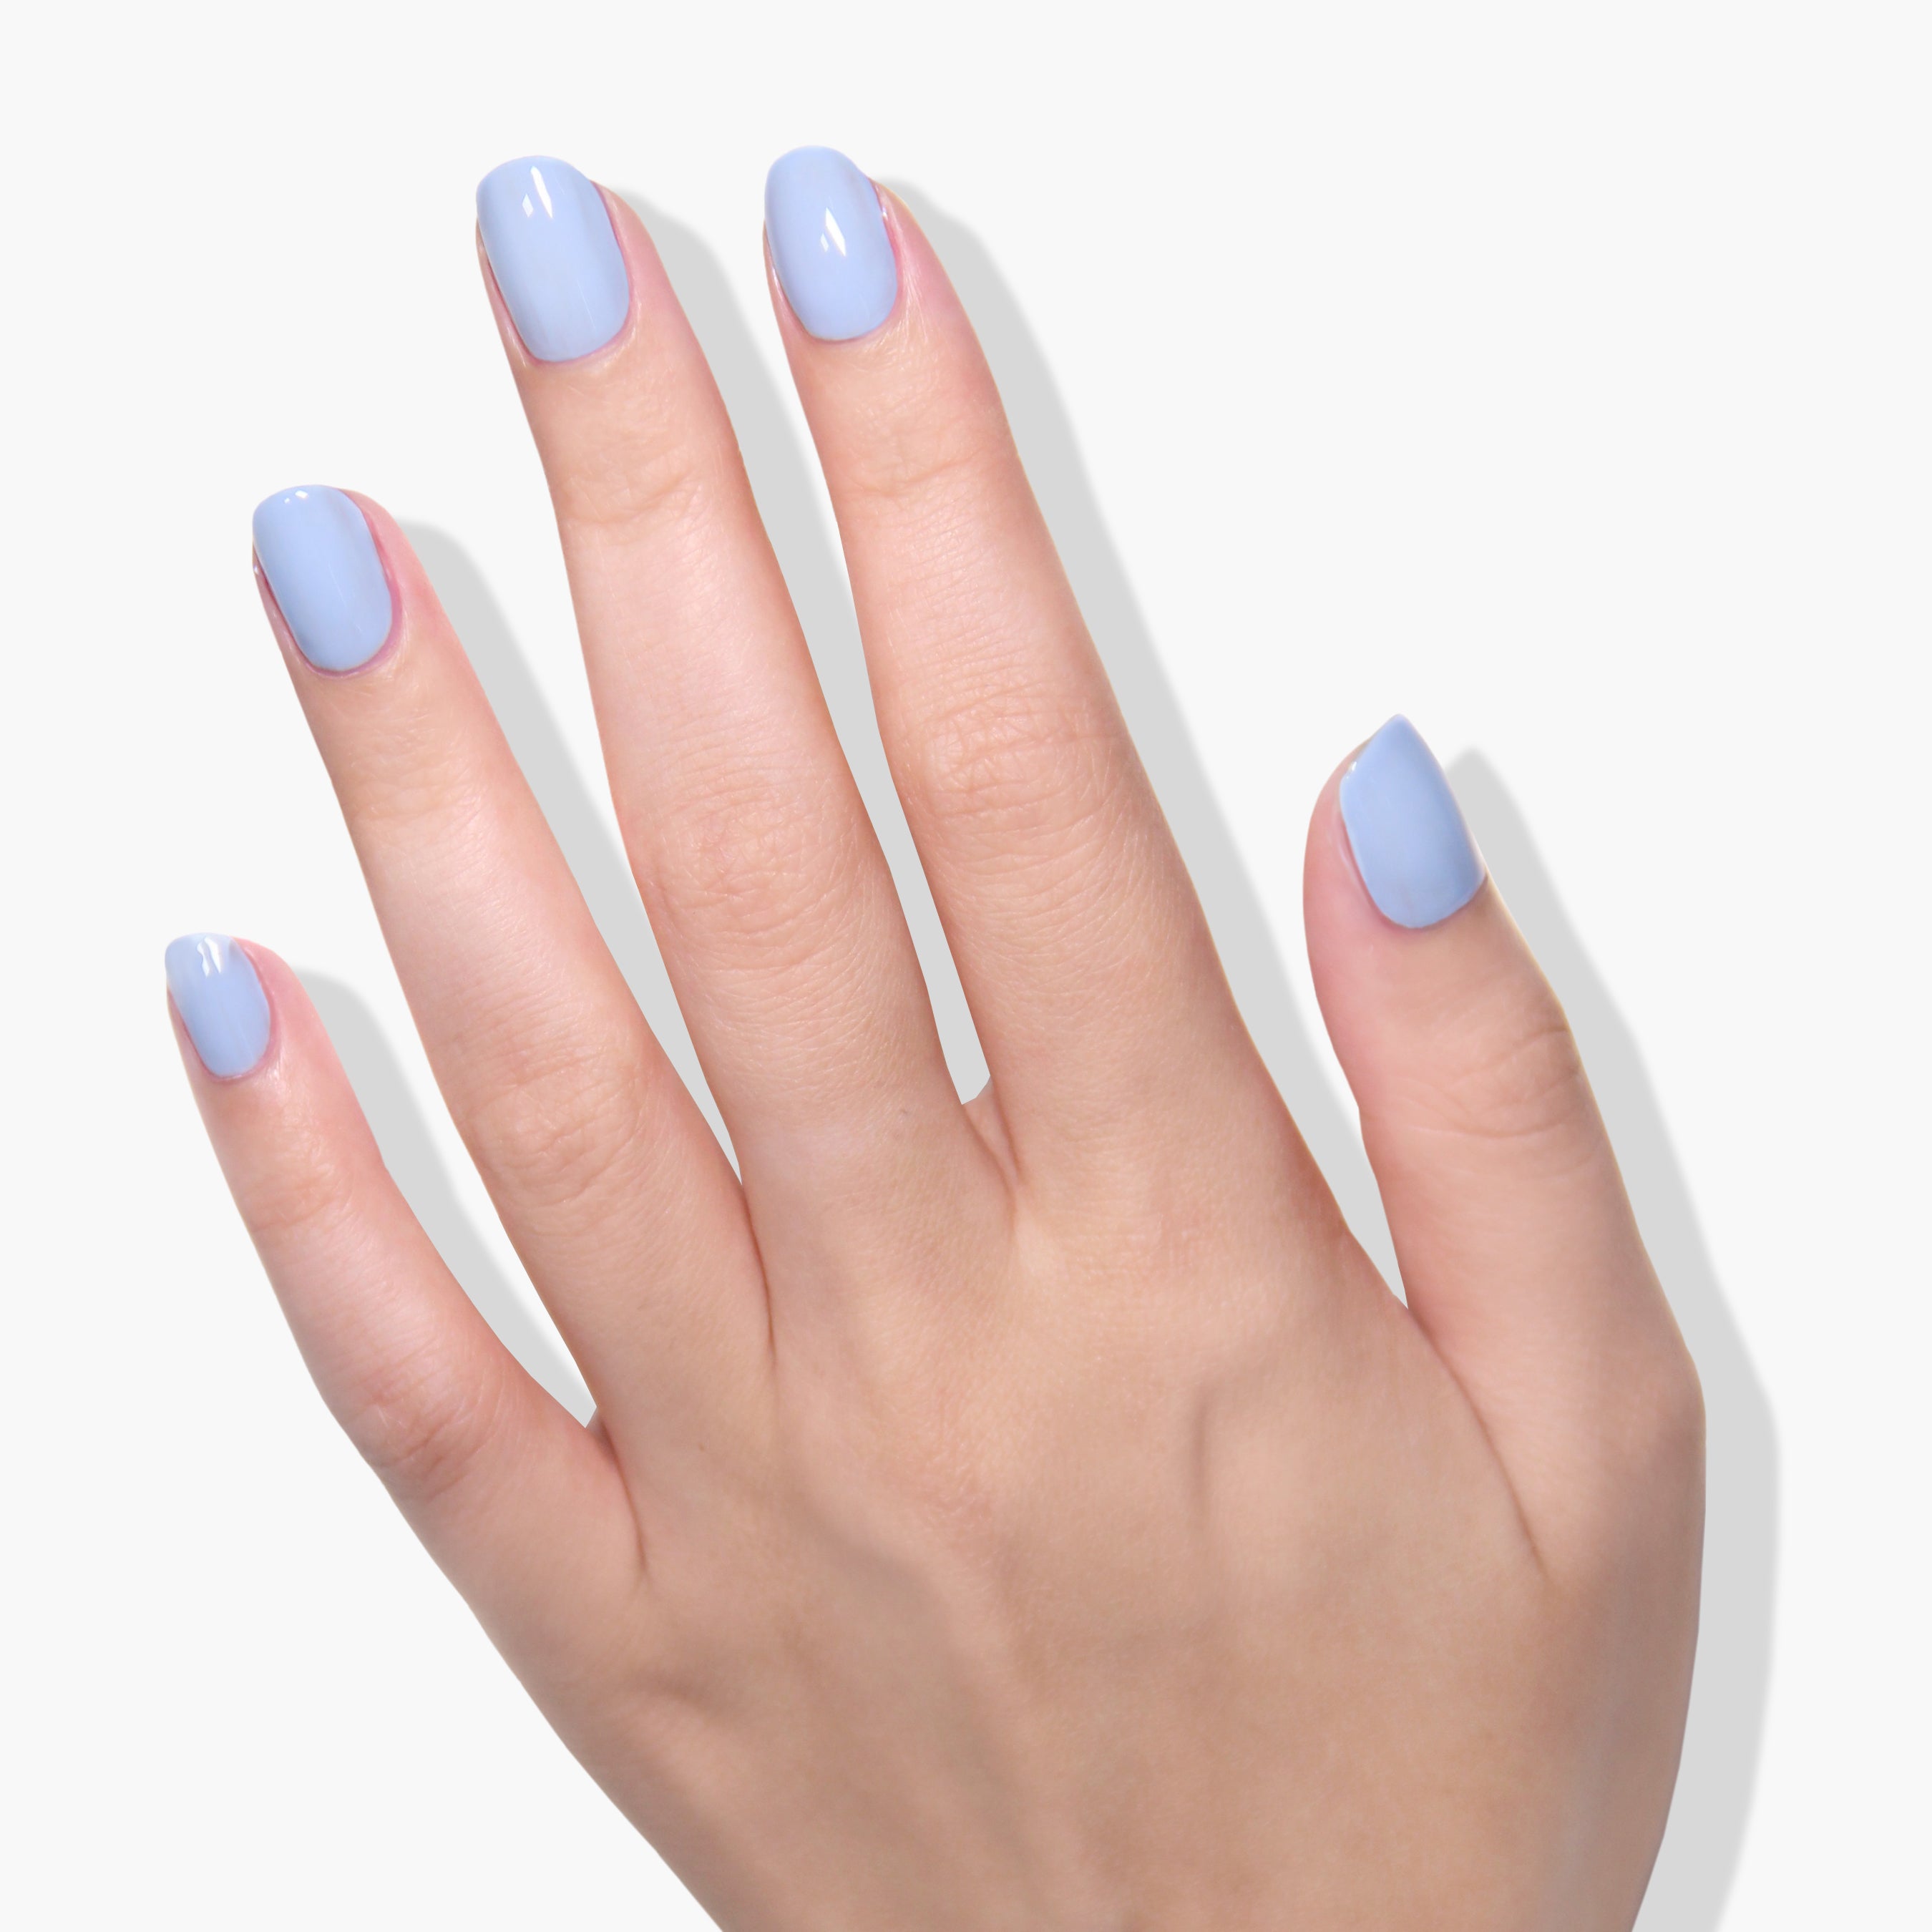 In the Clouds Gel Nail Polish